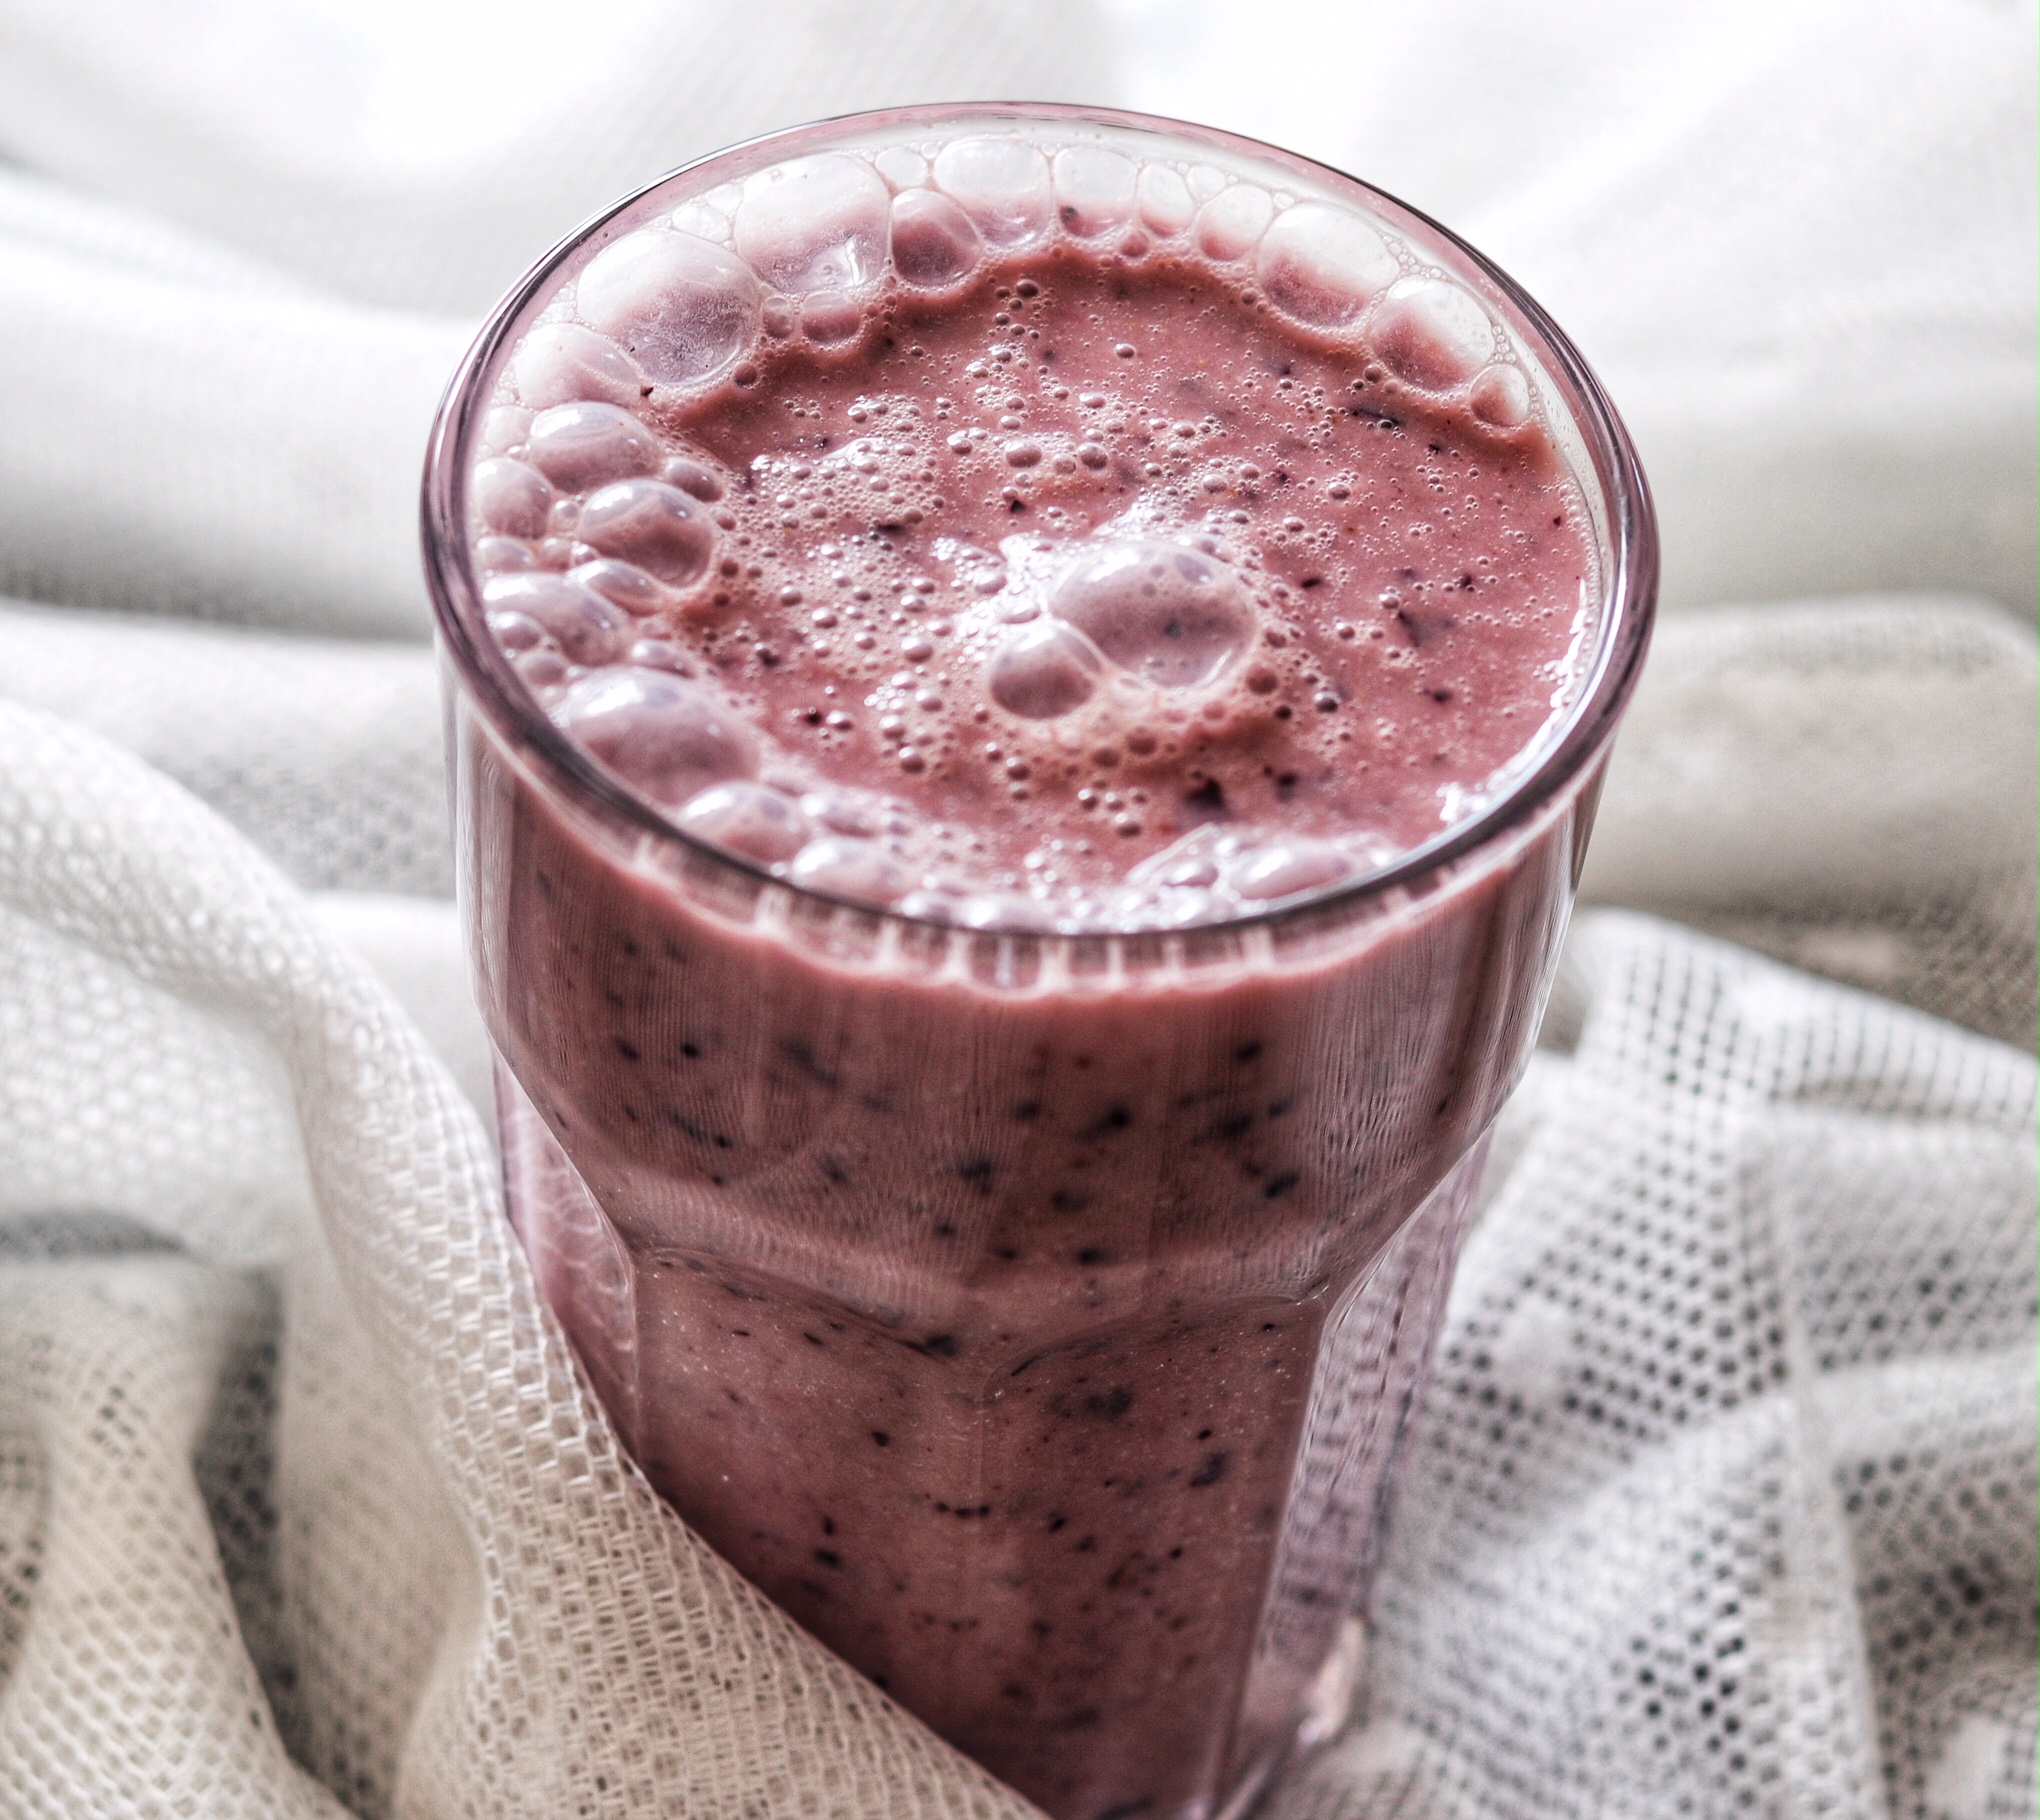 Blueberry grapes cucumber smoothie recipe